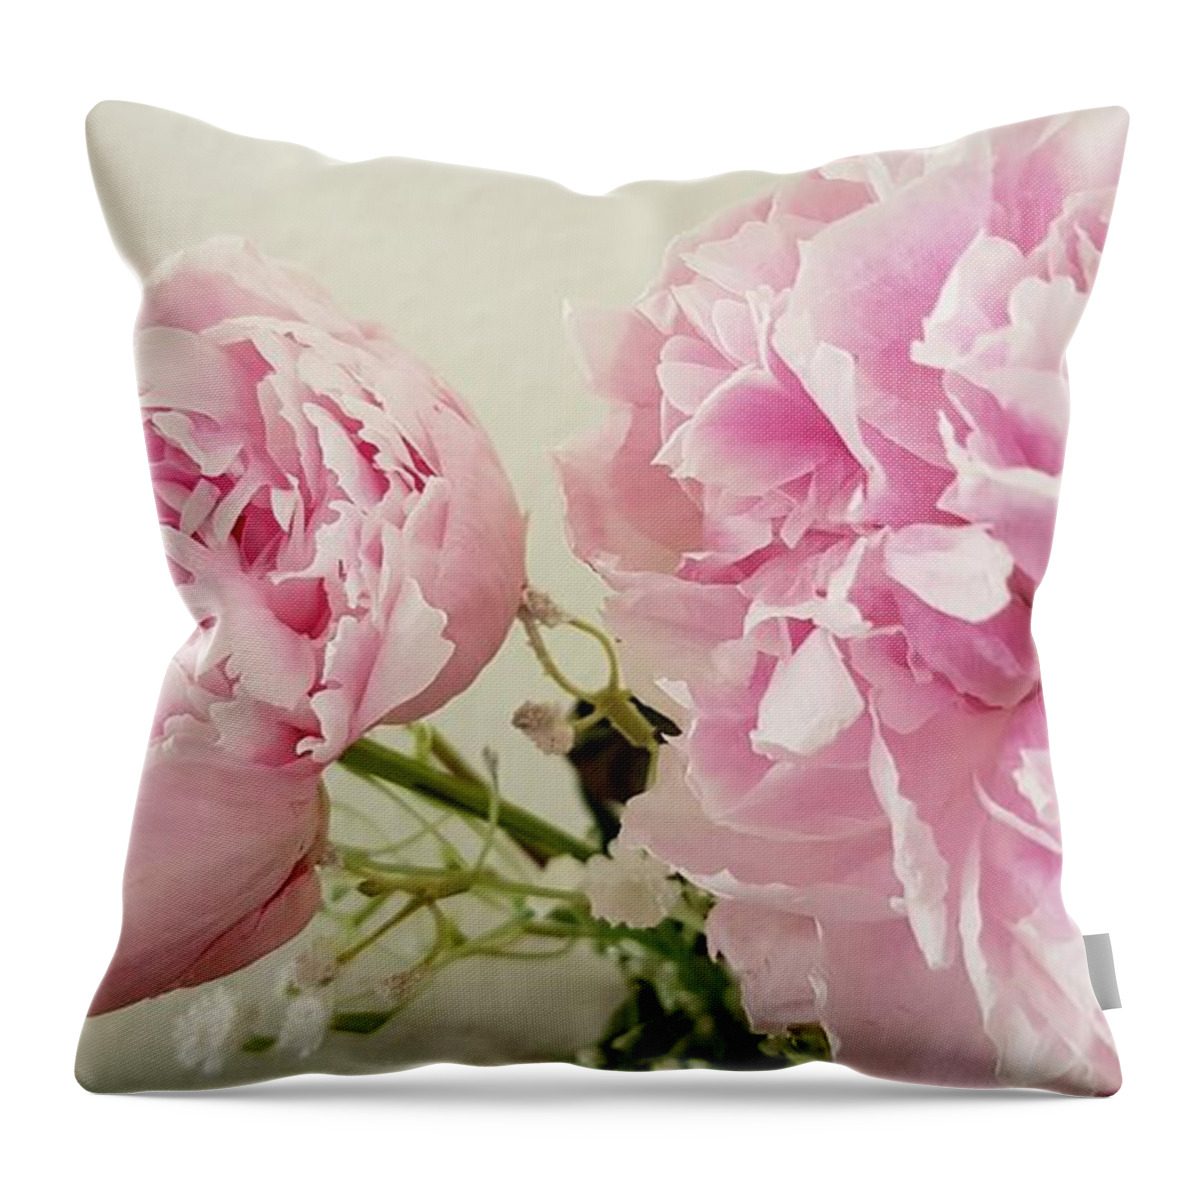 Rose Throw Pillow featuring the photograph You Make Me Feel Brand New by Paul Lovering